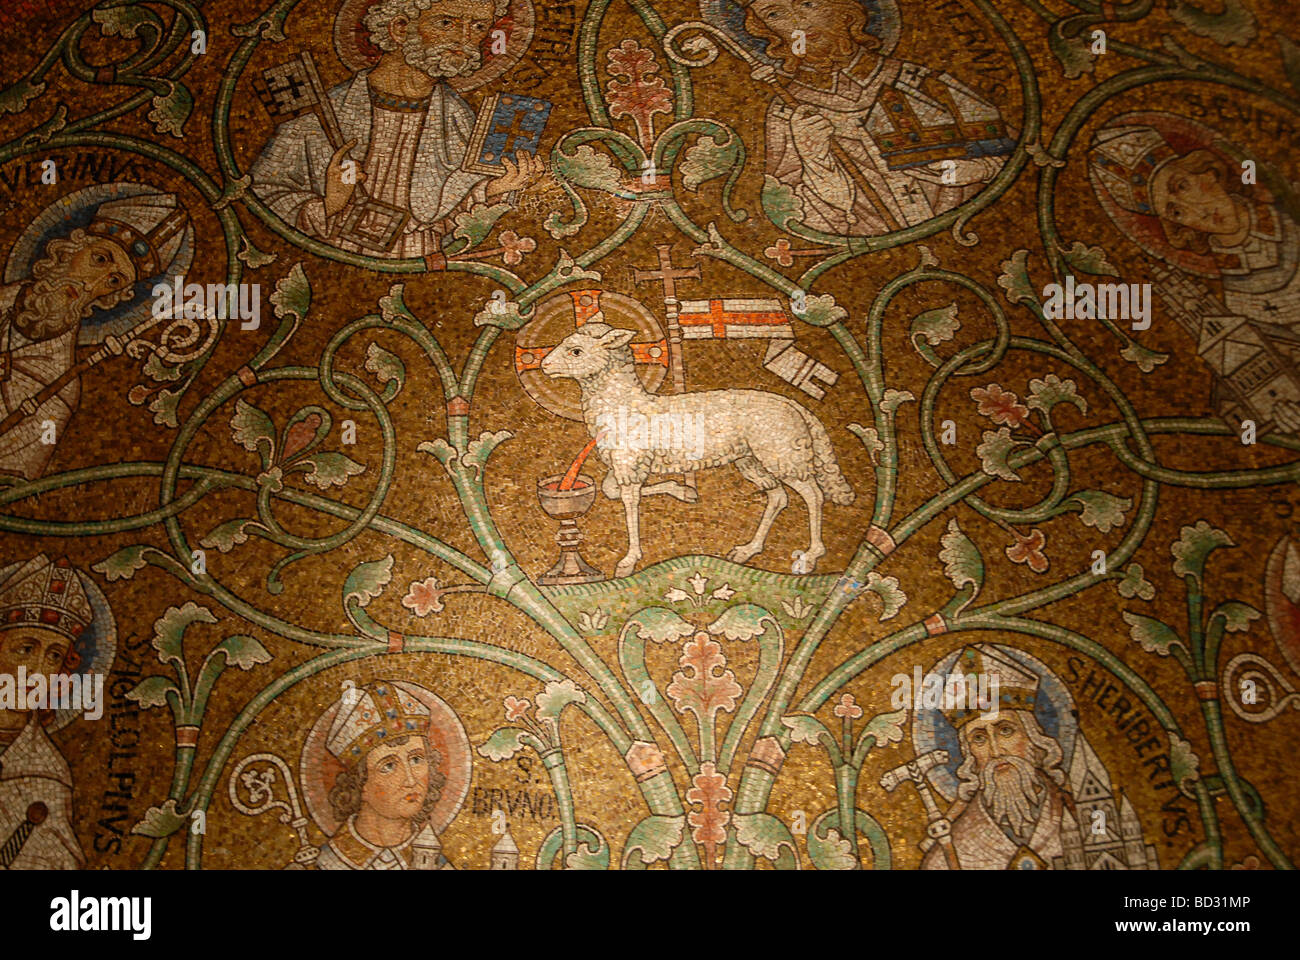 Mosaic of Agnus Dei the Lamb of God among the saints inside the Church of the Dormition abbey in mount Zion Old city East Jerusalem Israel Stock Photo